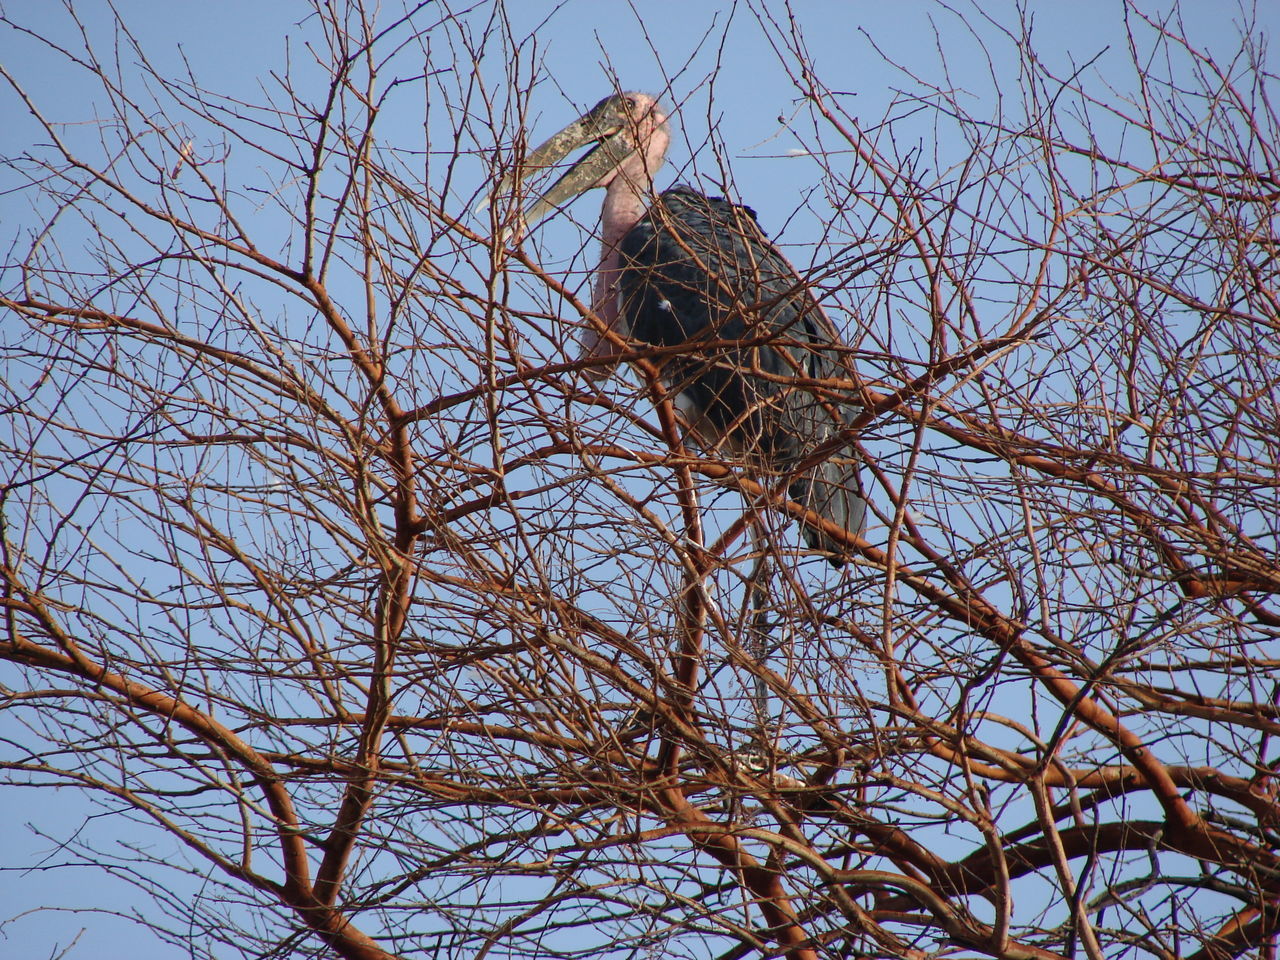 LOW ANGLE VIEW OF BIRD PERCHING ON BARE TREE